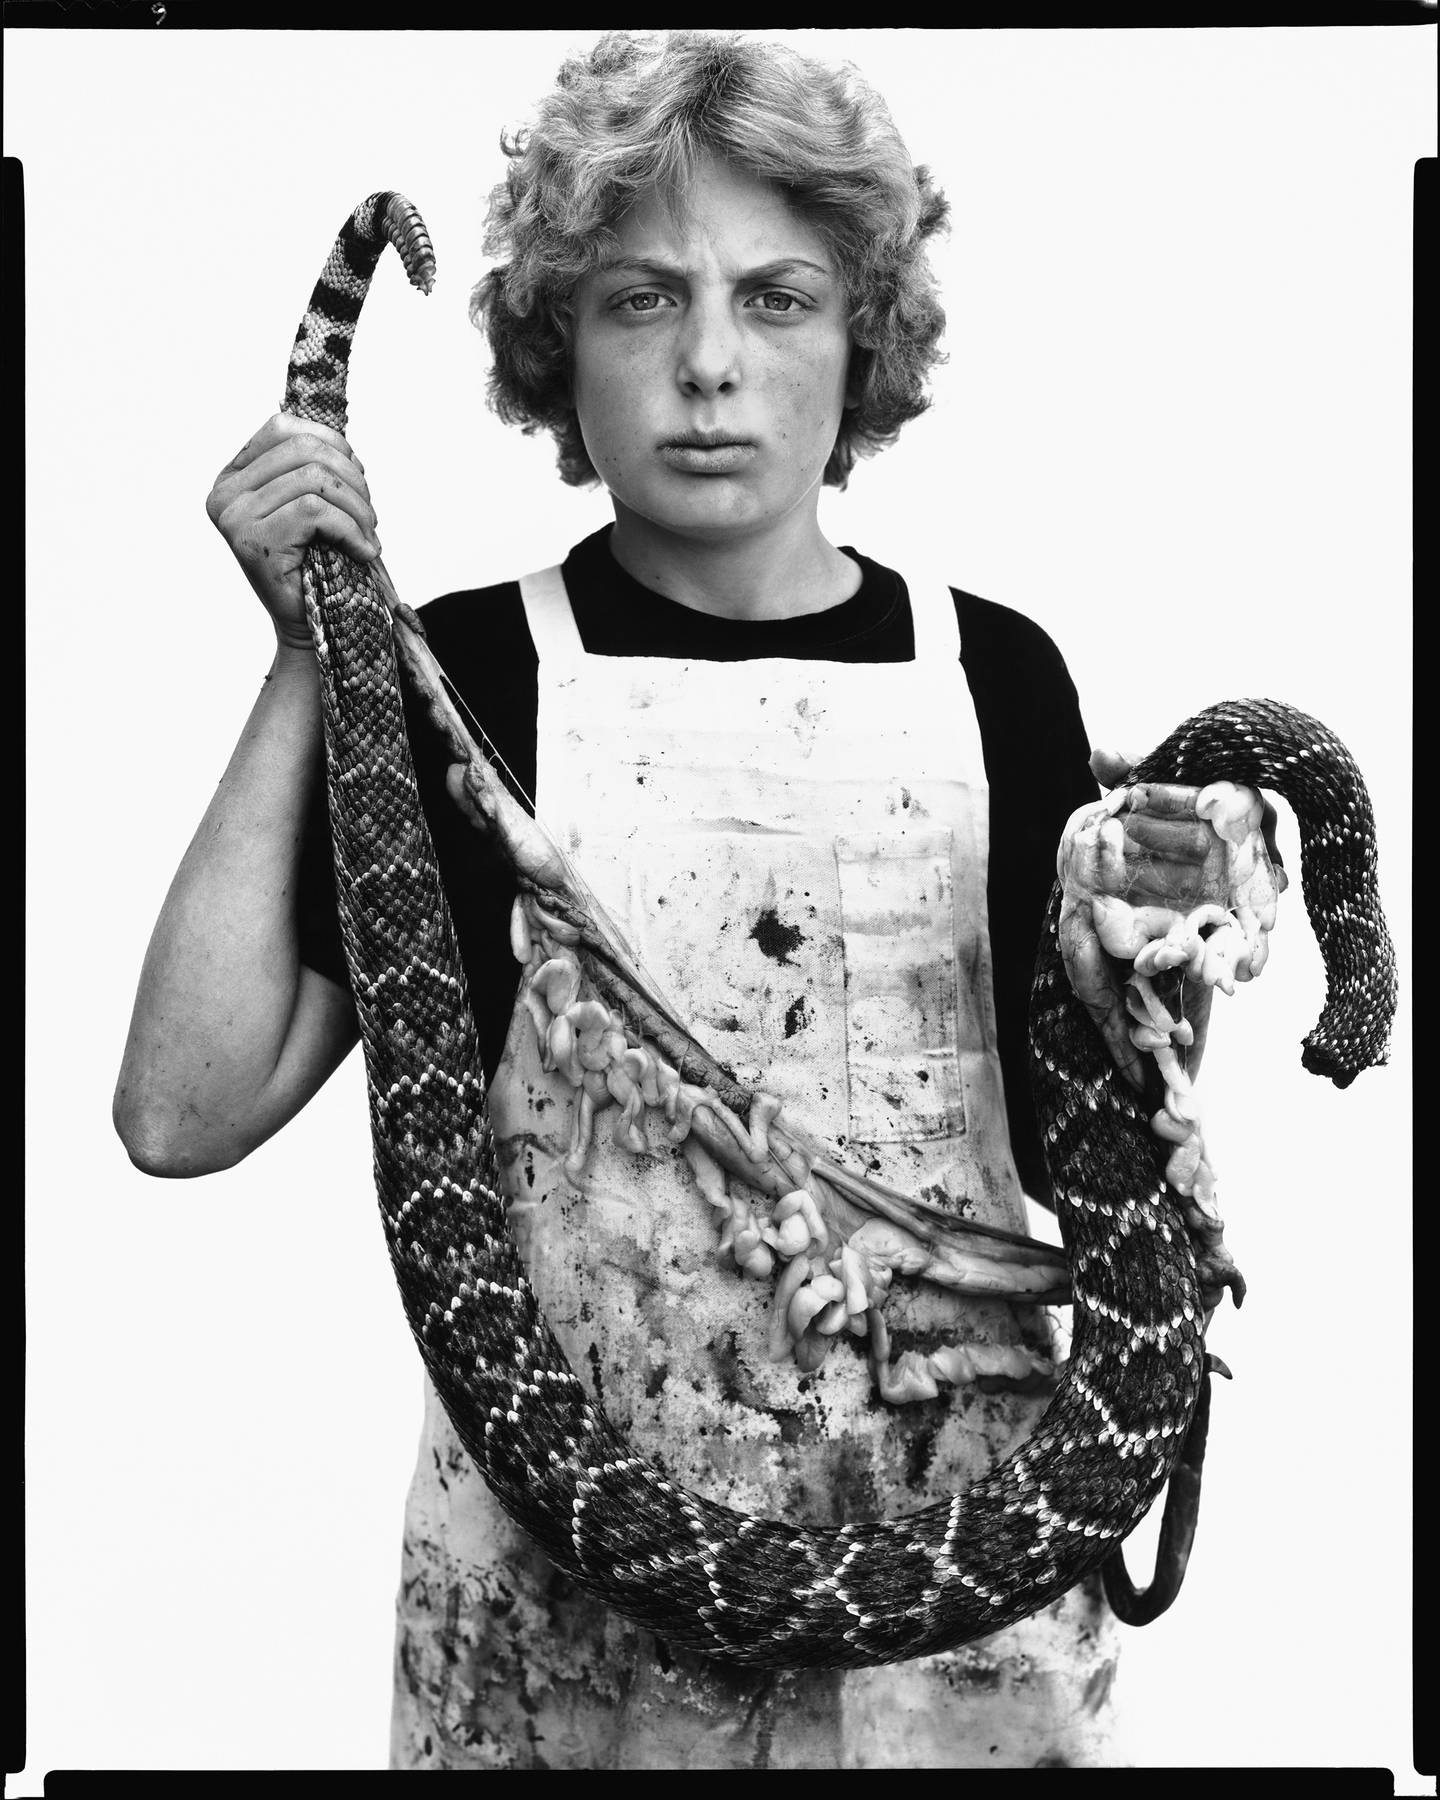 Boyd Fortin, thirteen-year-old rattlesnake skinner, Sweetwater, Texas, March 10, 1979.